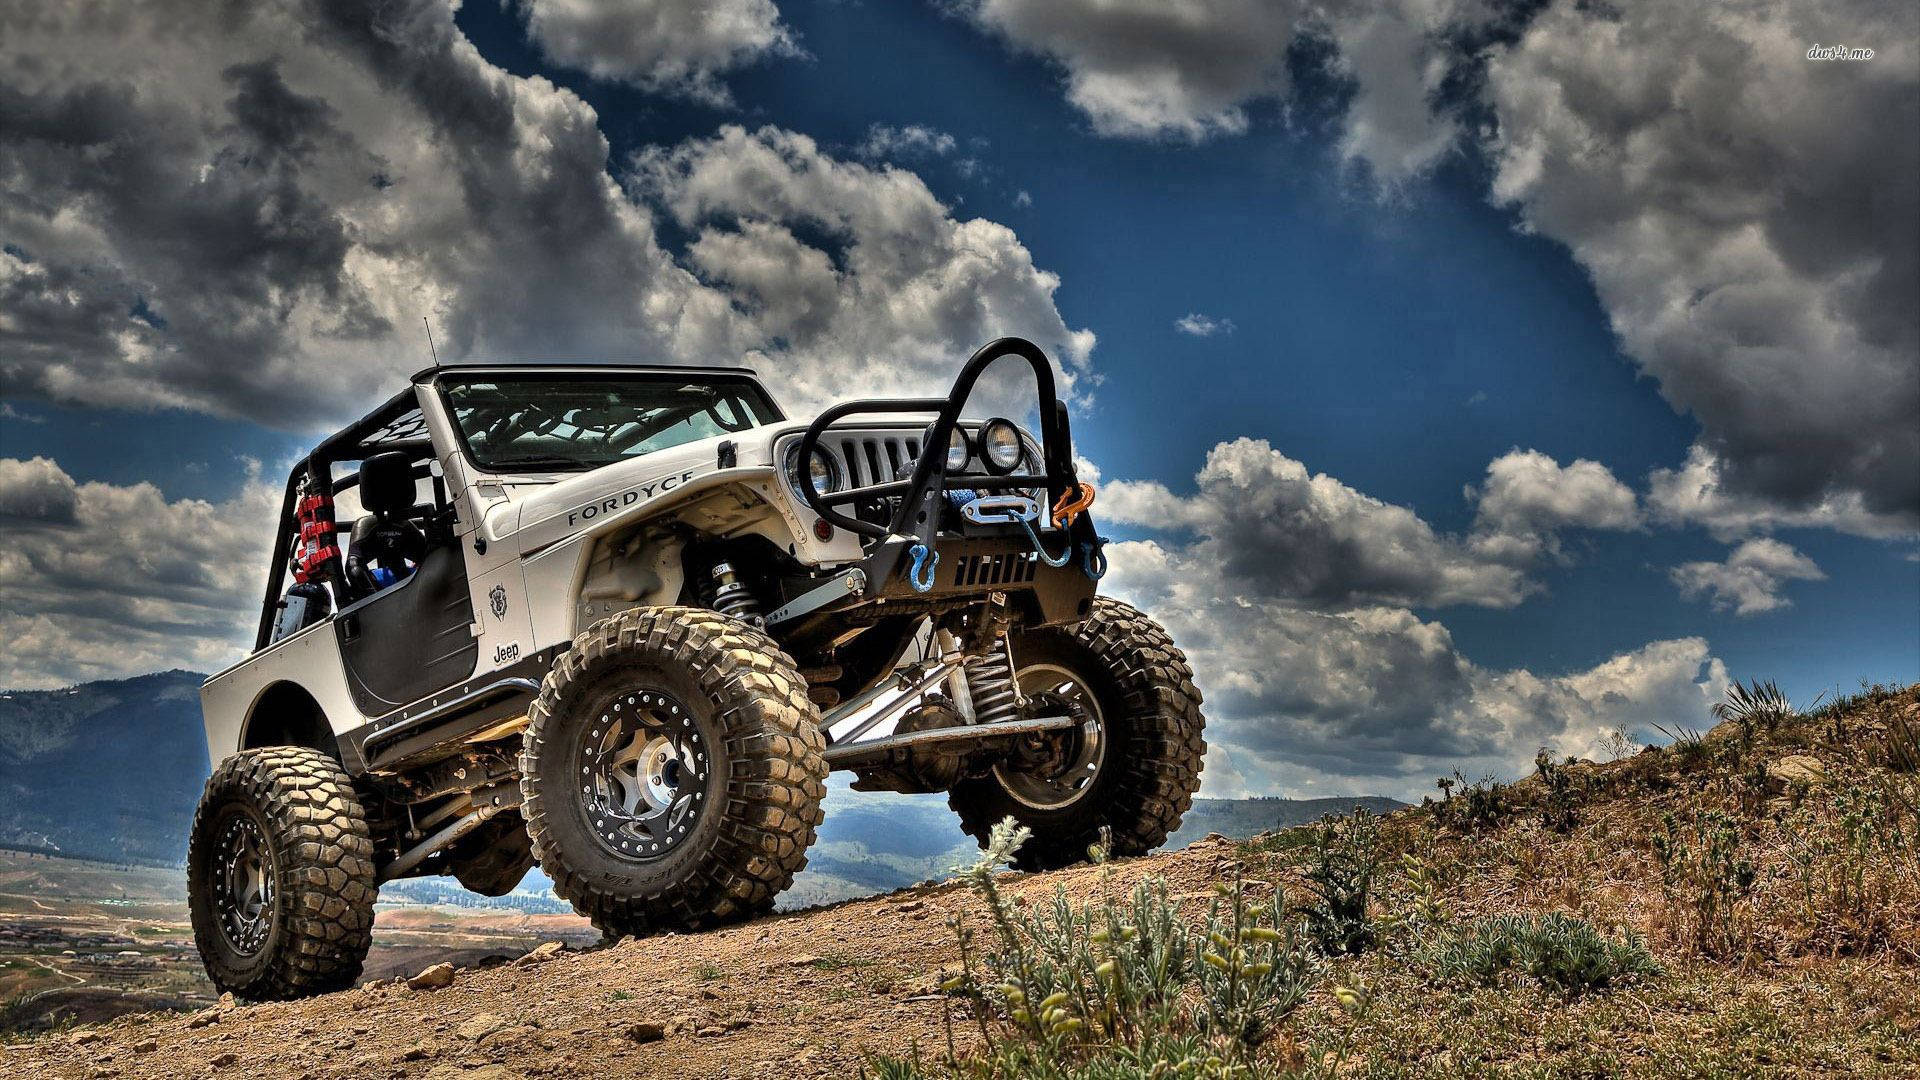 Free Jeep Wallpaper Downloads, [100+] Jeep Wallpapers for FREE | Wallpapers .com